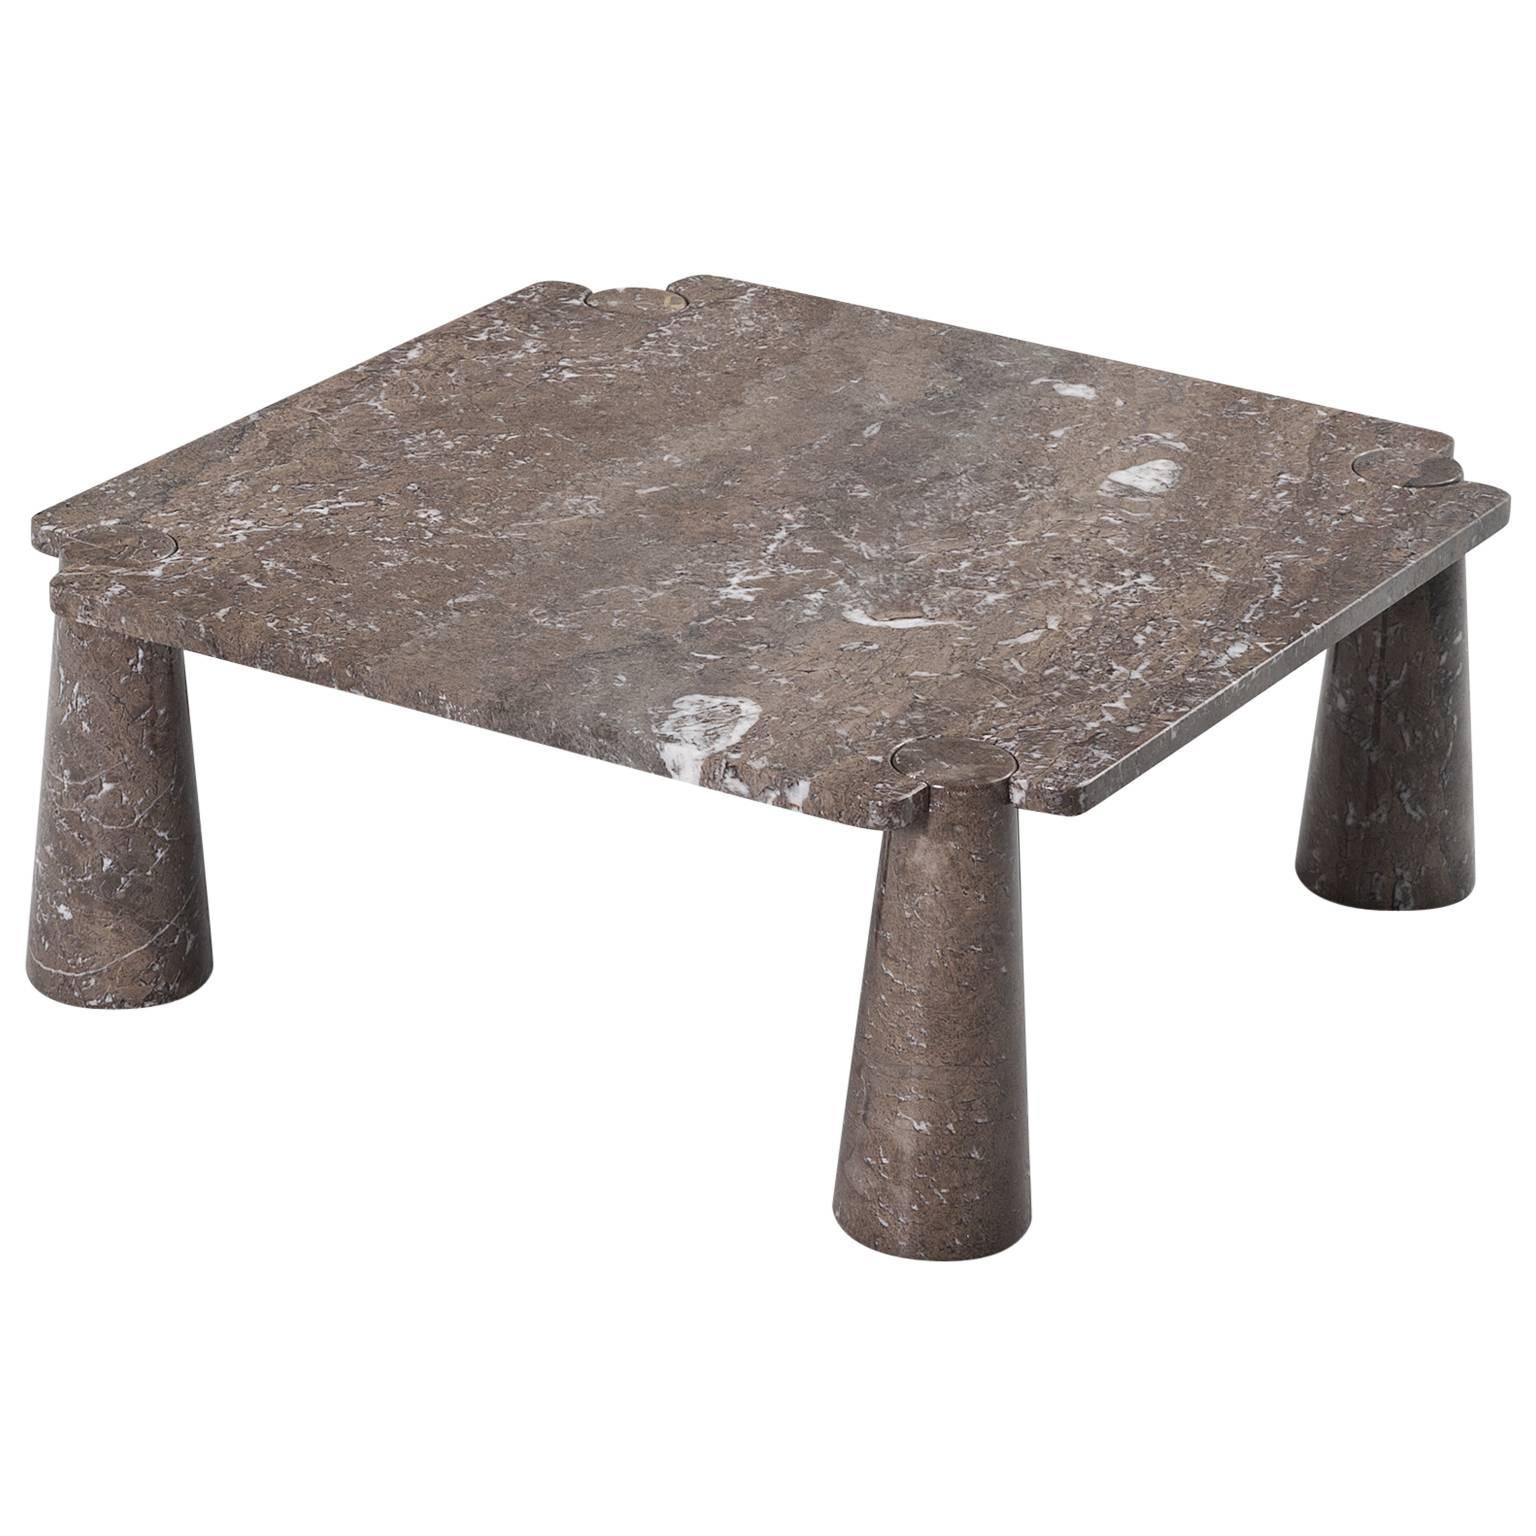 Angelo Mangiarotti Early 'Eros' Square Coffee Table in Marble